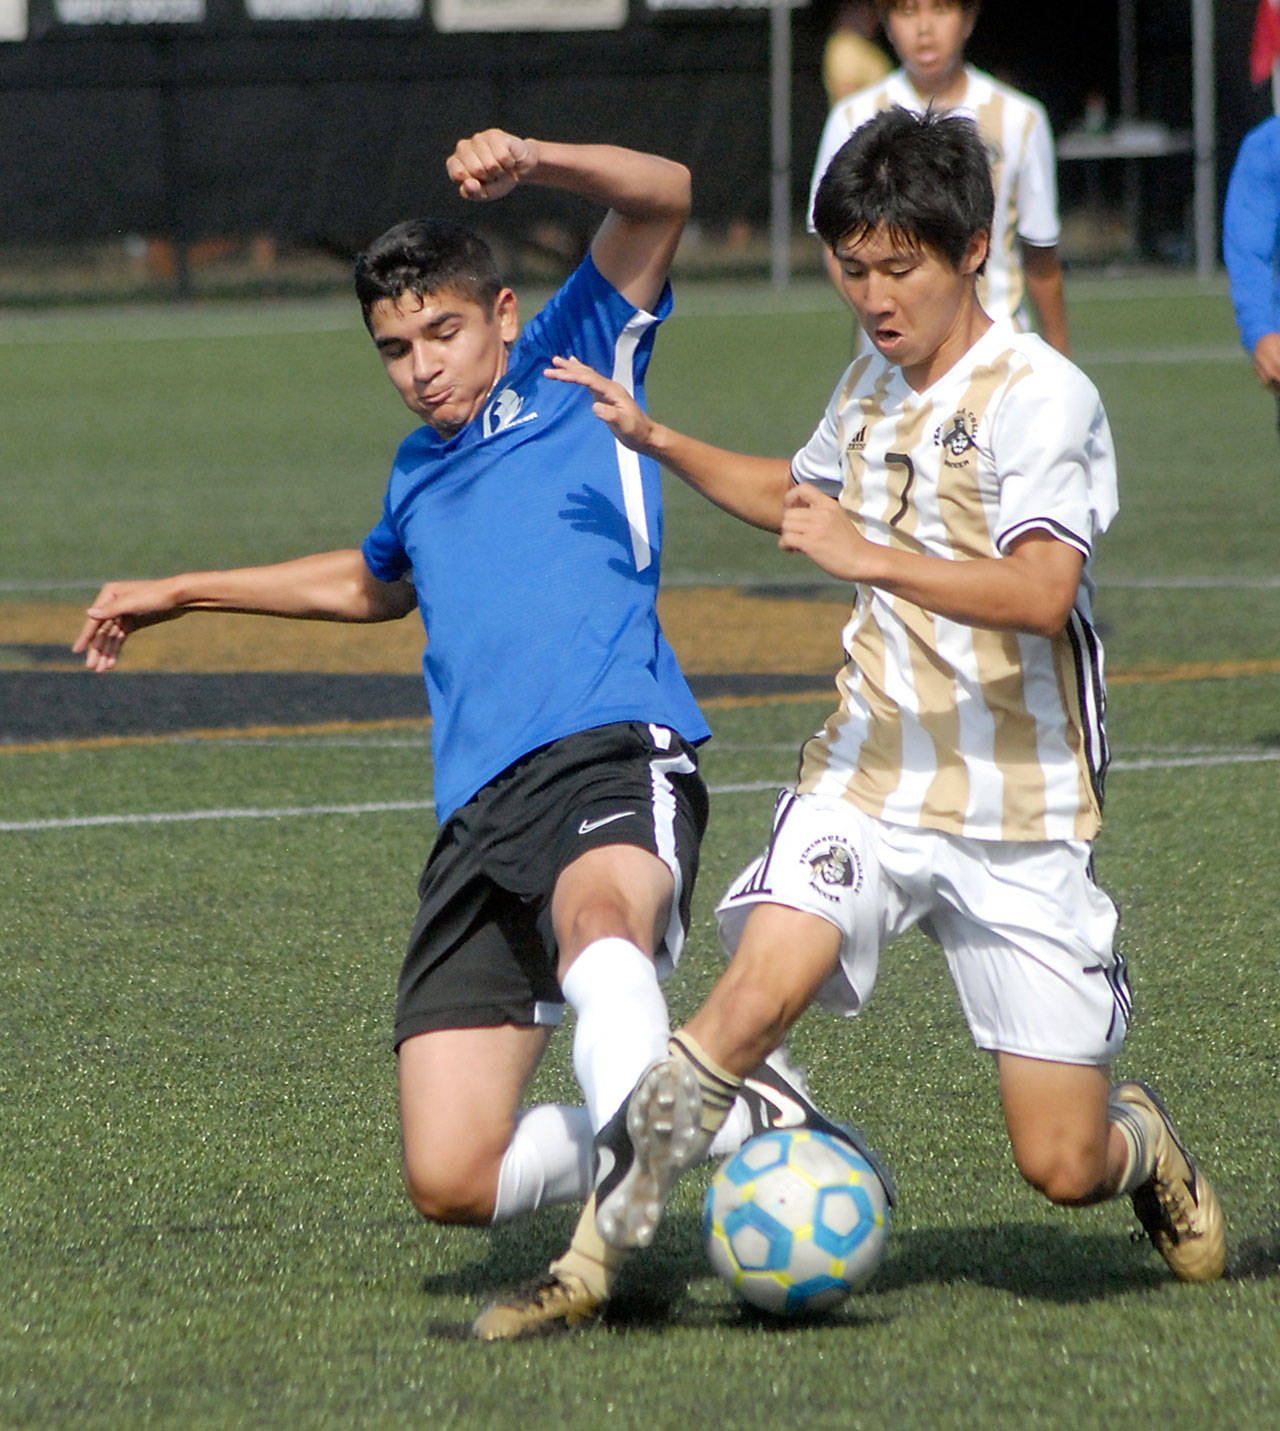 Keith Thorpe/Peninsula Daily News South Puget Sound’s Miguel Bravo, left, and Peninsula’s Hidenobu Inoue battle for ball control on Saturday in Port Angeles.